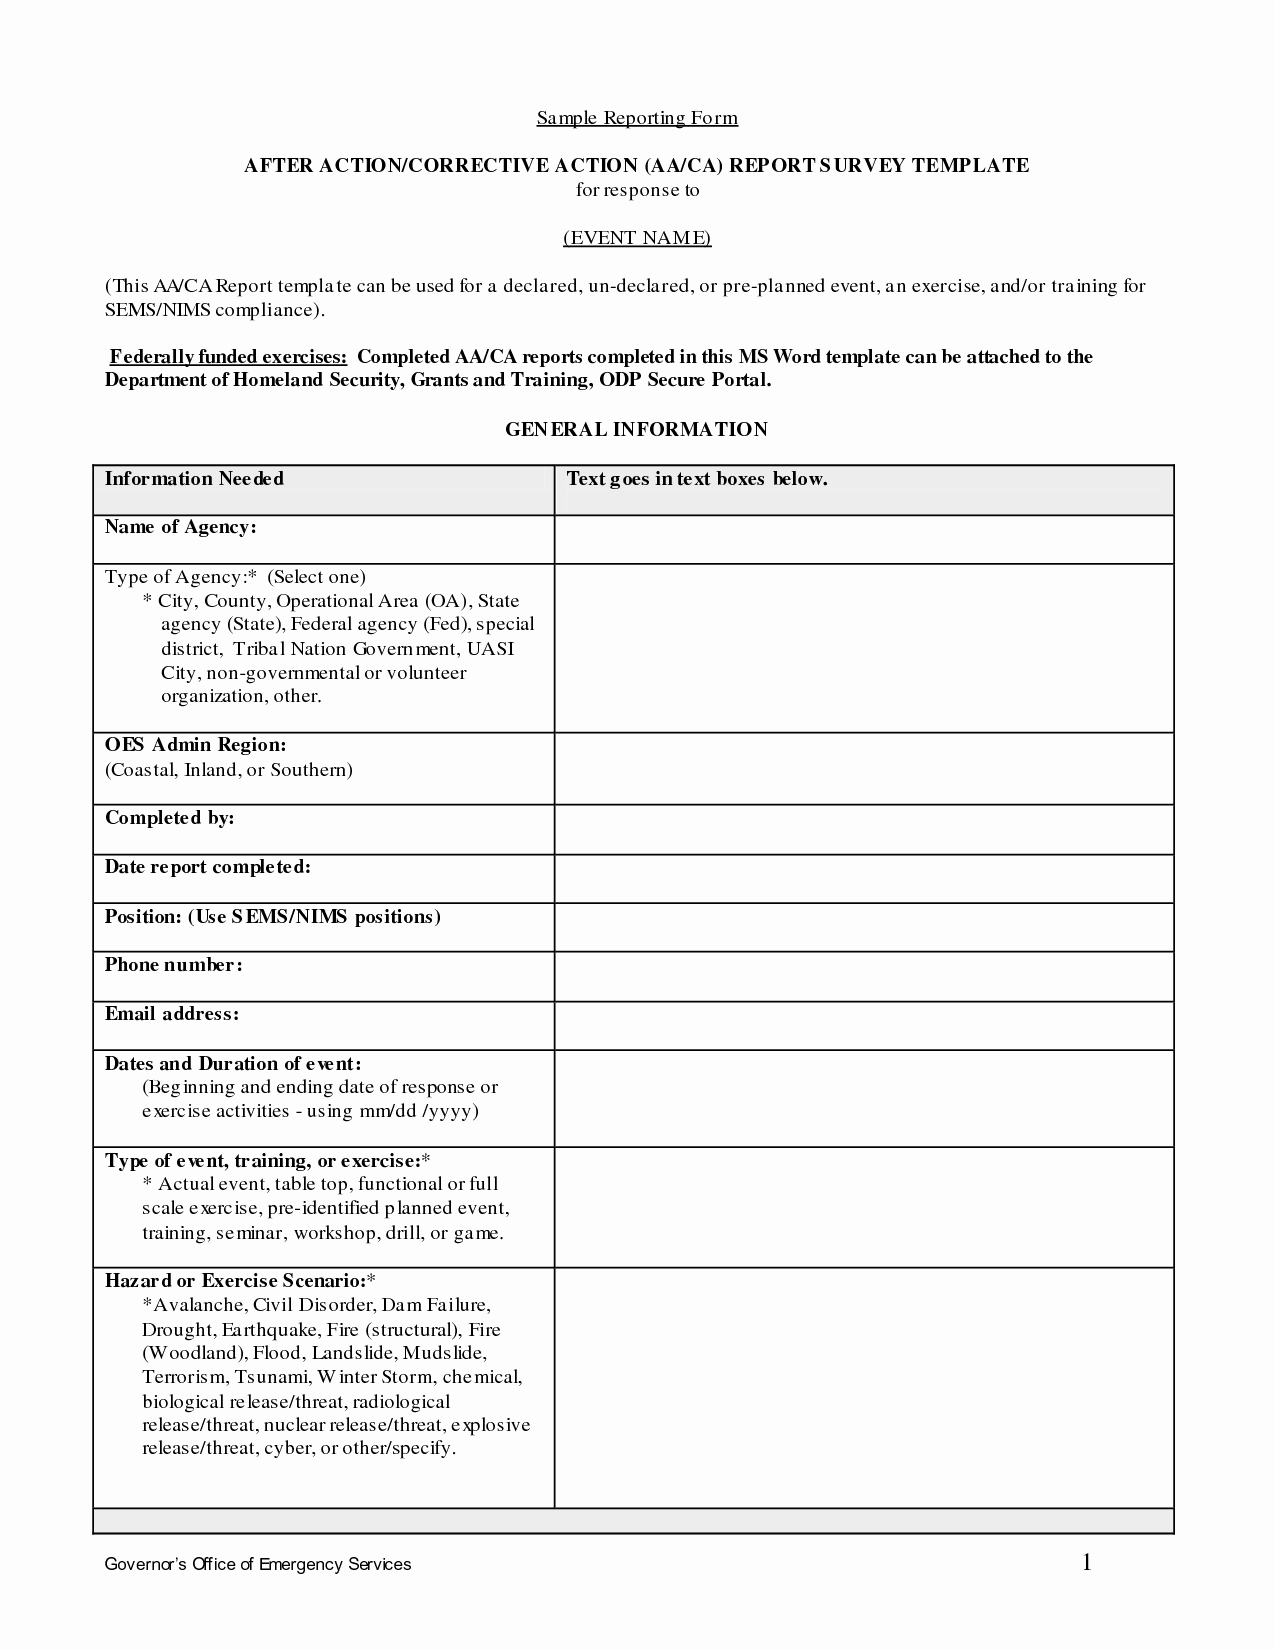 After Action Report Template Luxury after Action Report Template